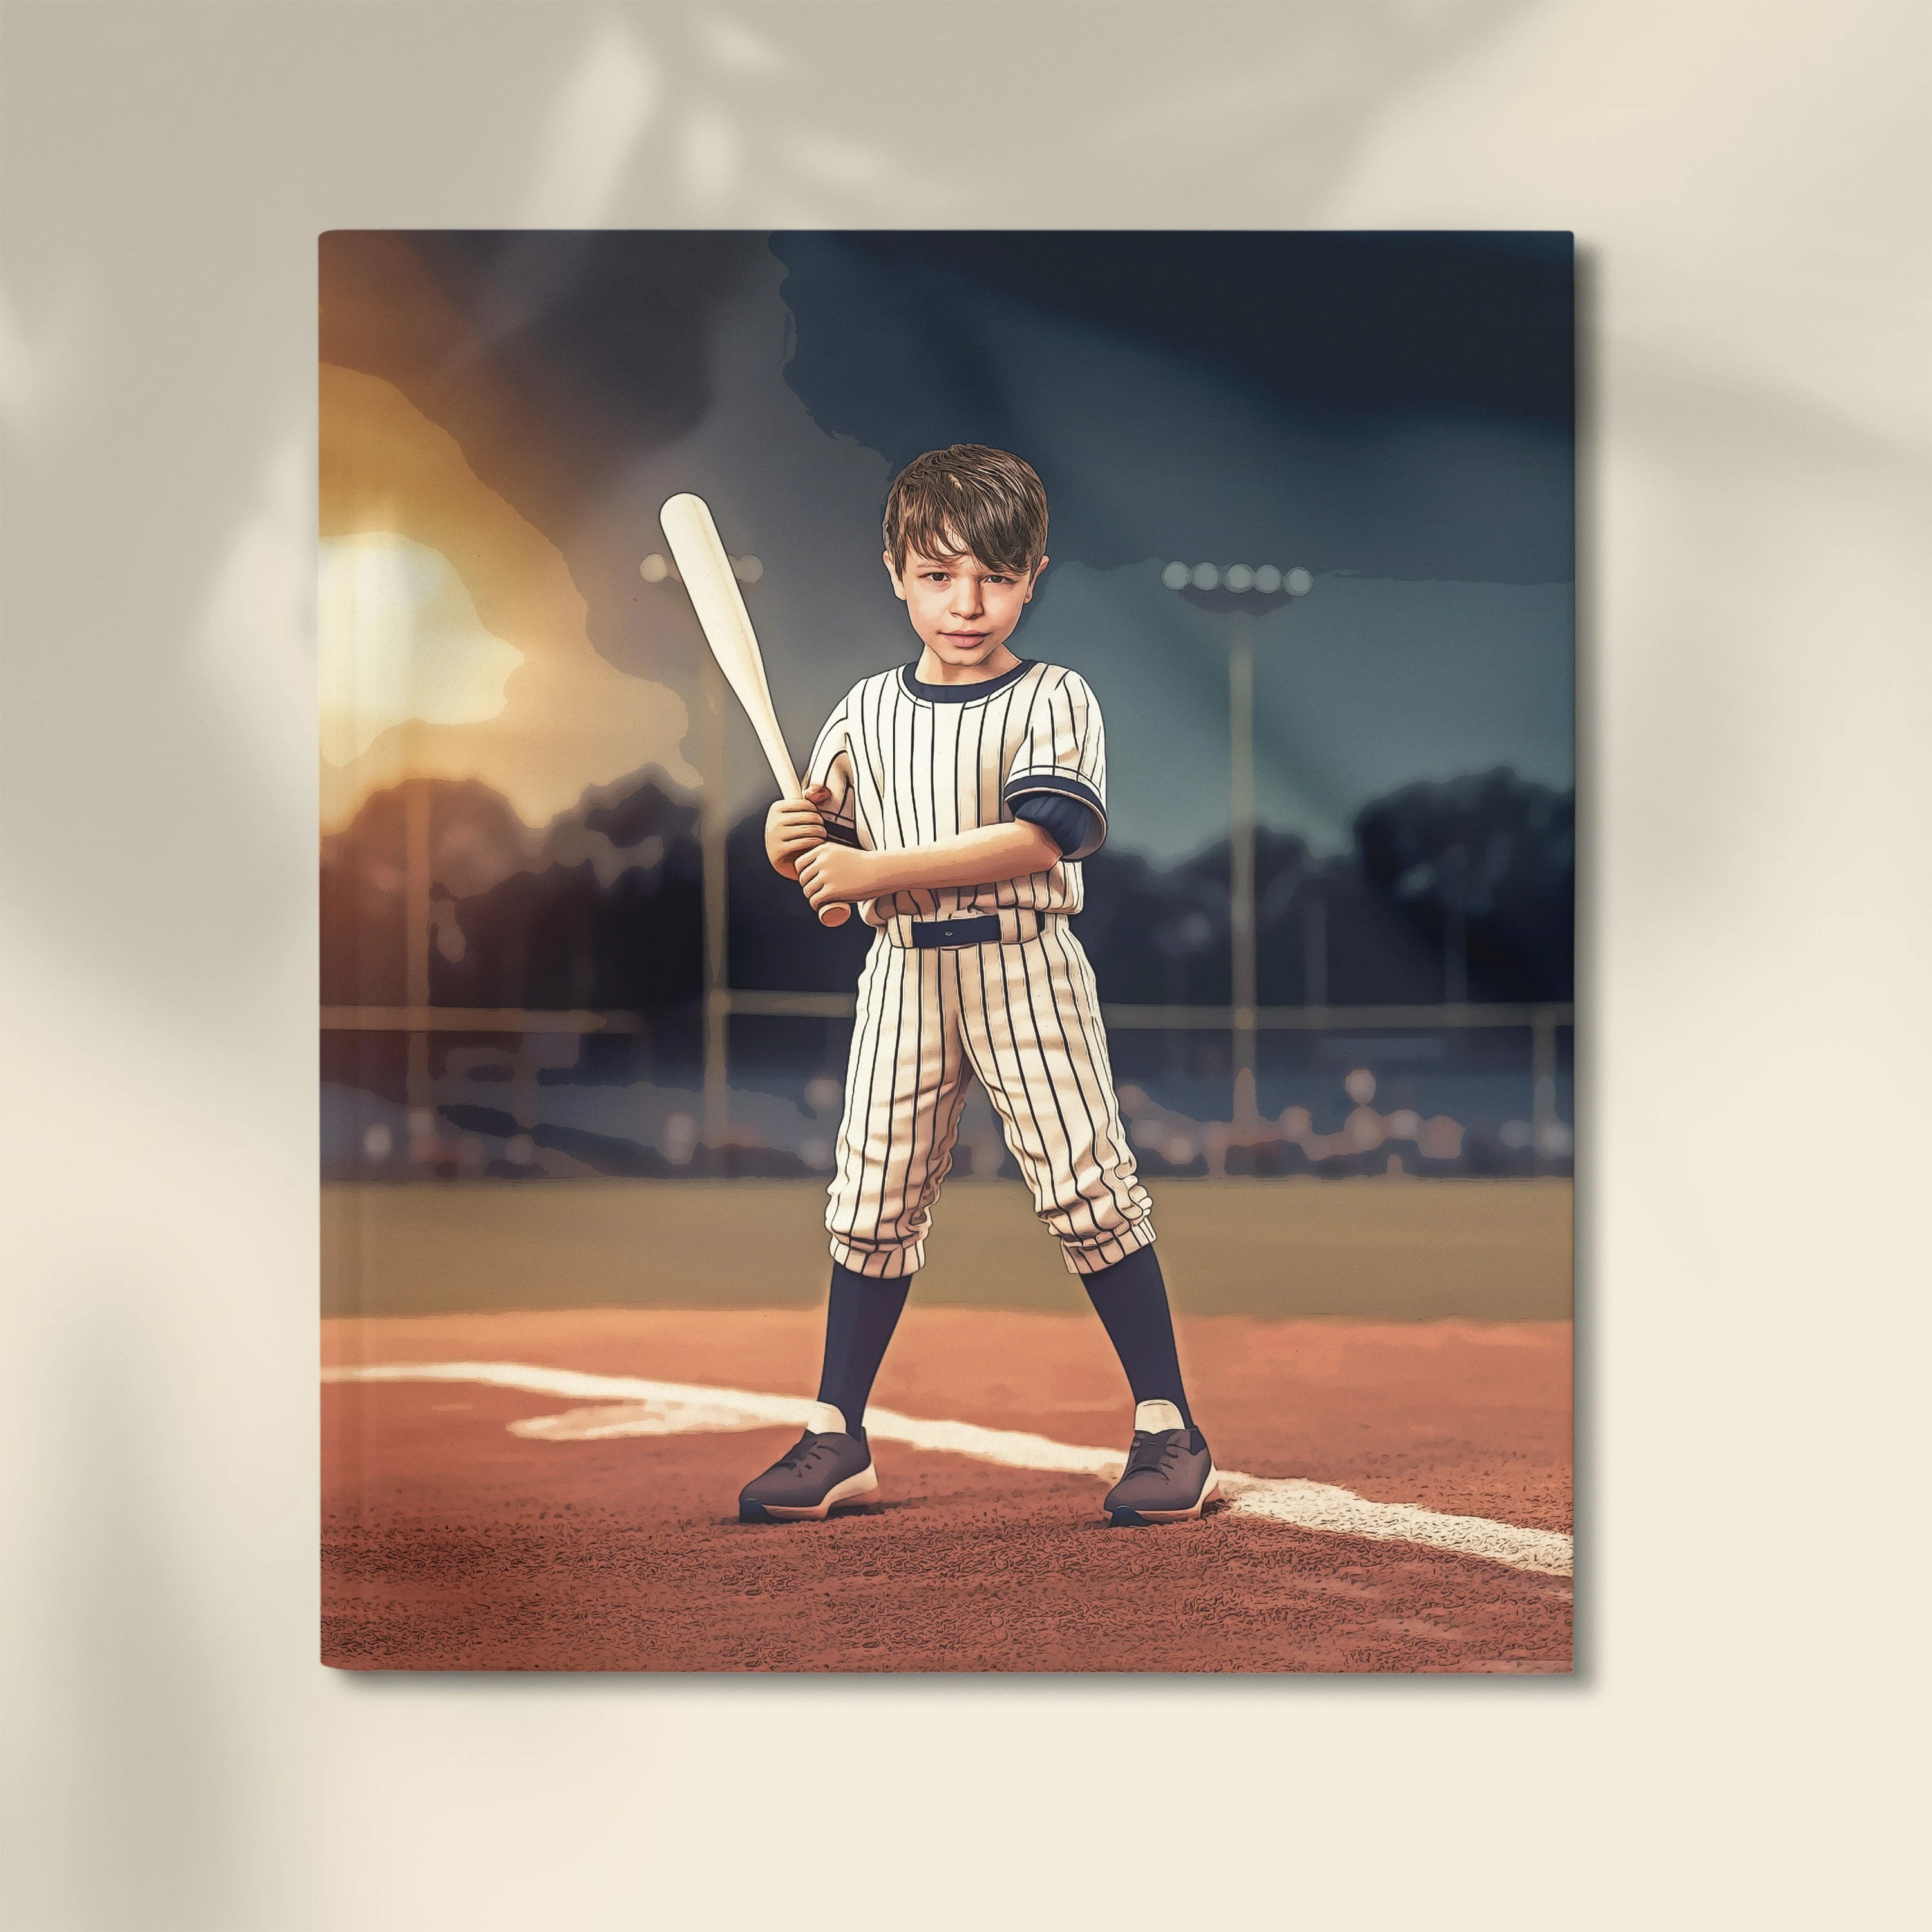 Baseball Player Kids Custom Portrait, Get Your Own Baseball Player Portrait from your photo,Digital File Only